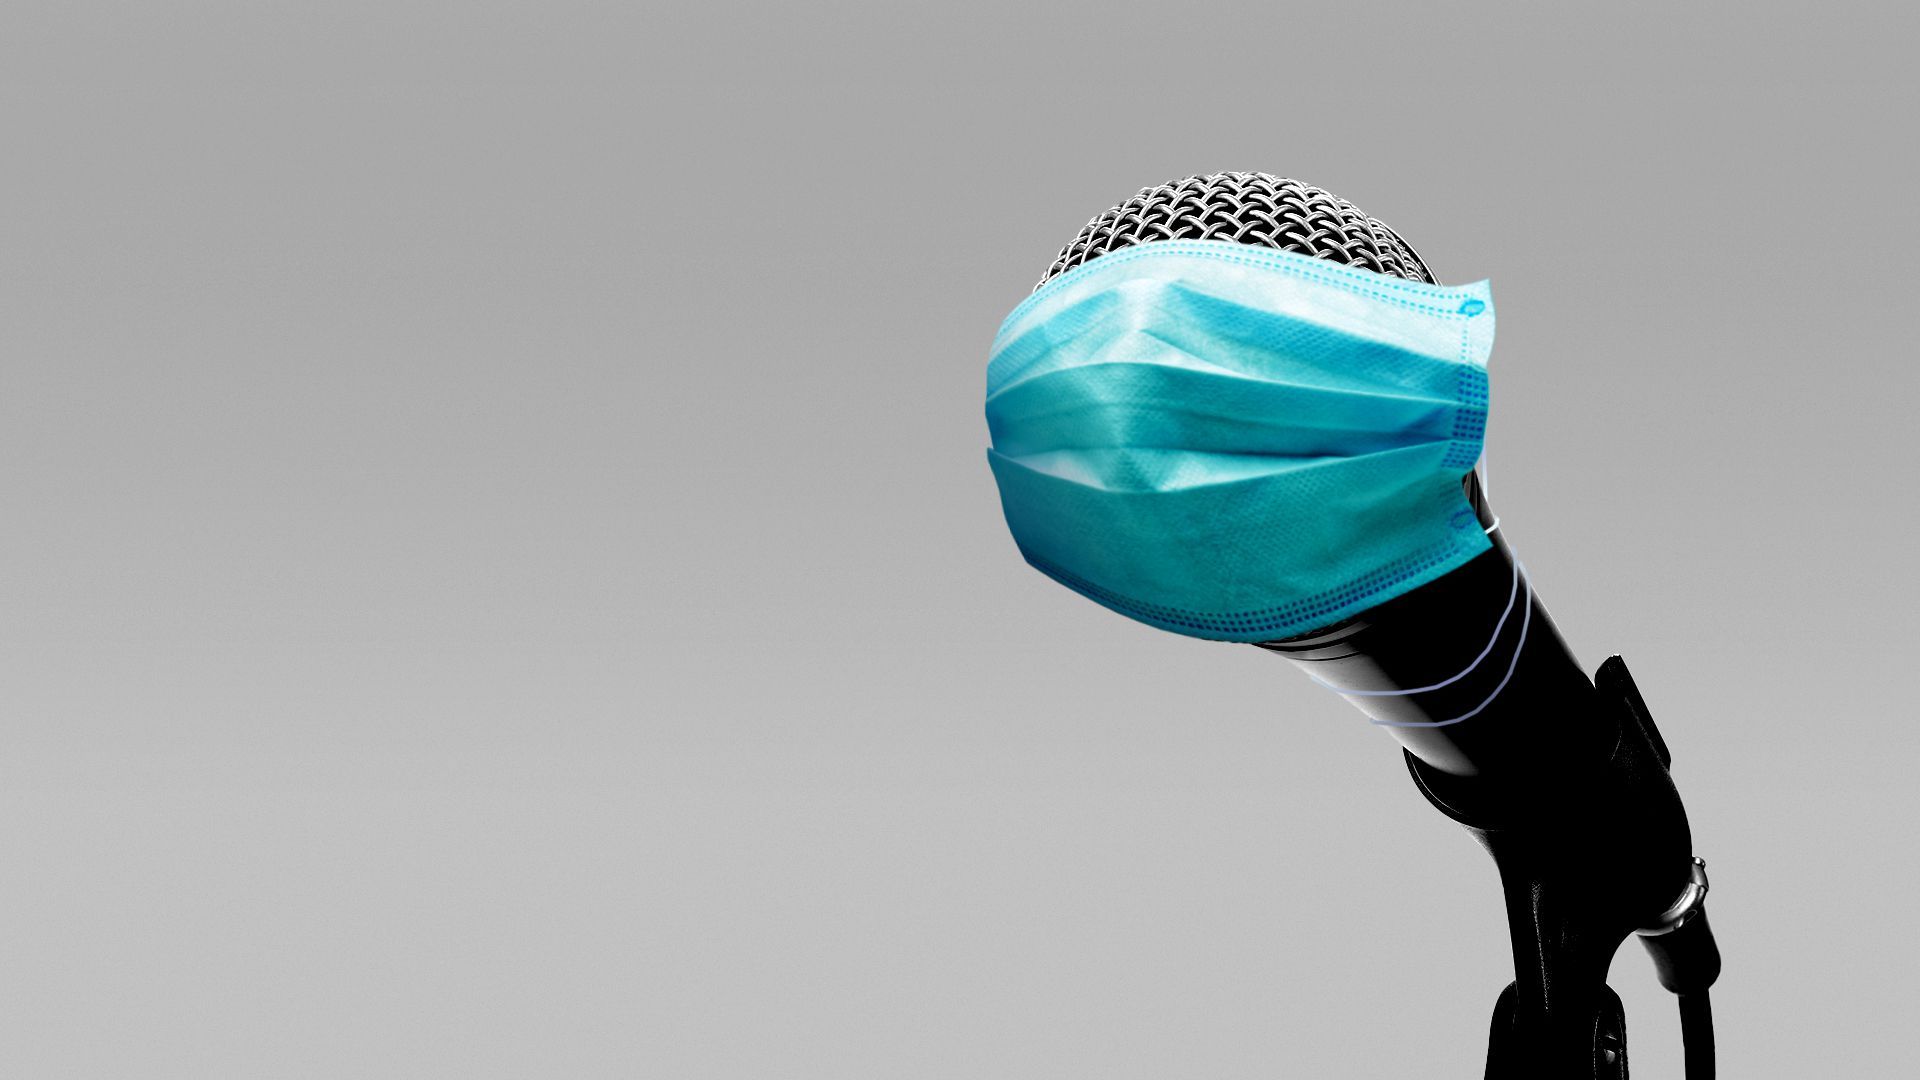 Illustration of a microphone covered with a face mask